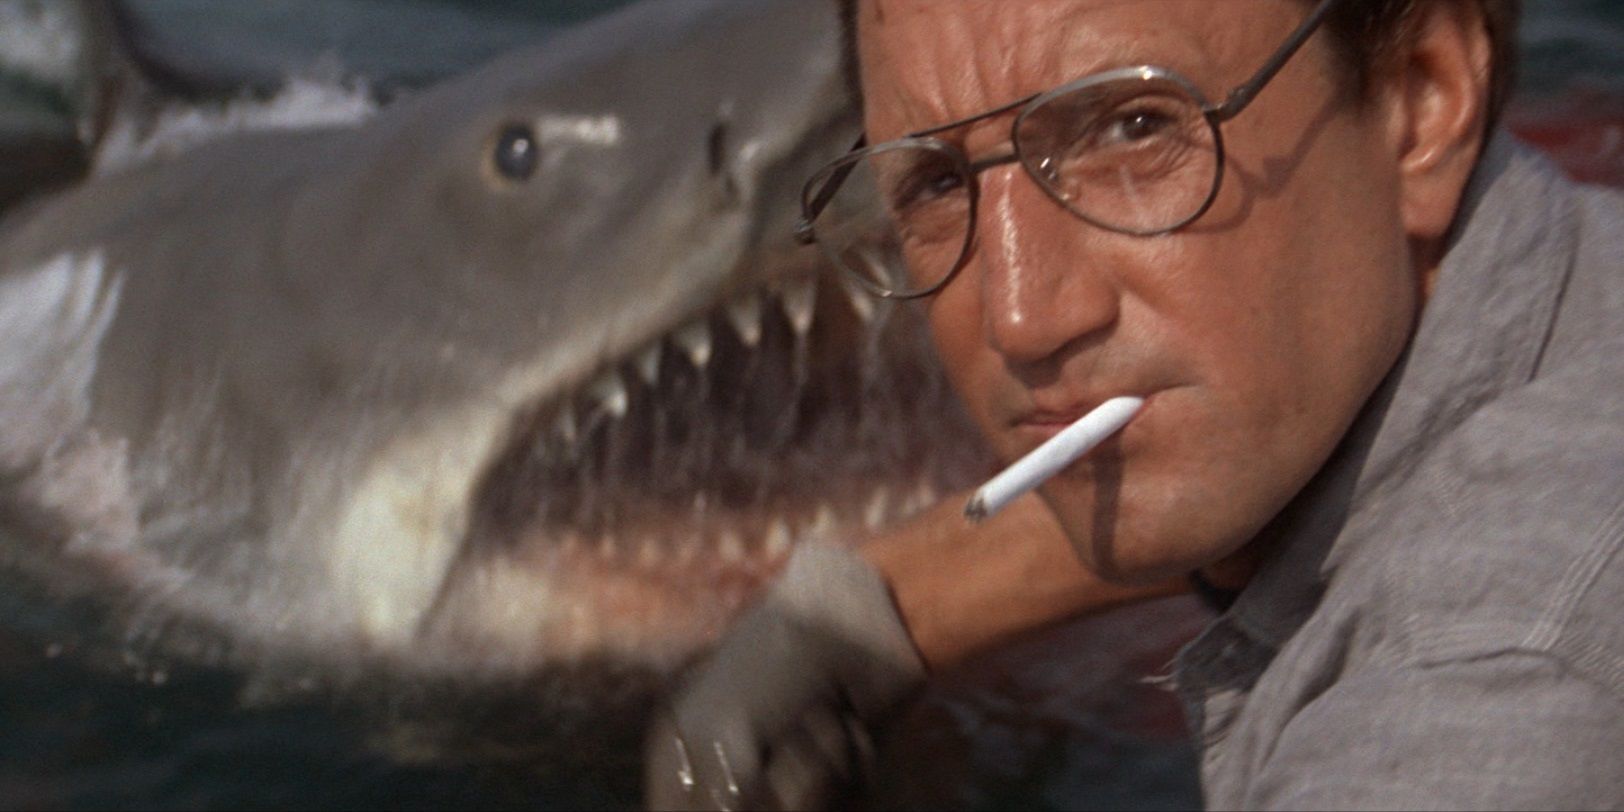 Chief Brody with the shark in Jaws